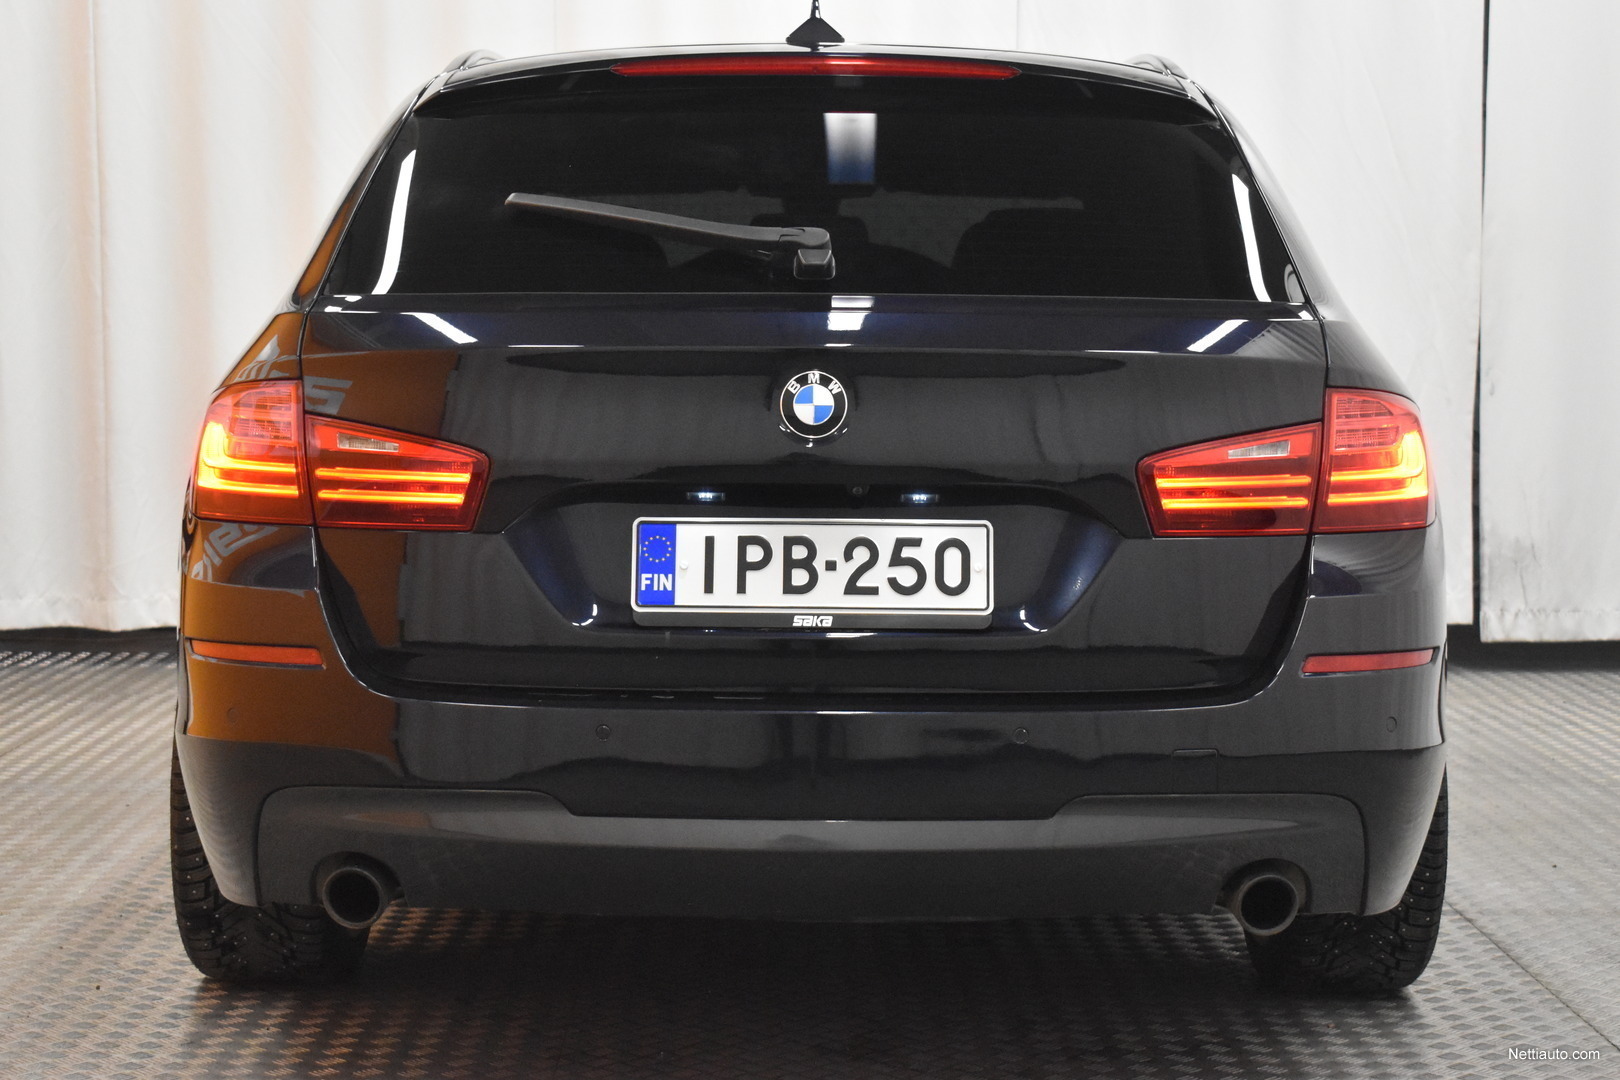 MY BMW 535d Touring F11  COSTS & TIPS 2 Years of Ownership REVIEW on  AUTOBAHN by AutoTopNL 